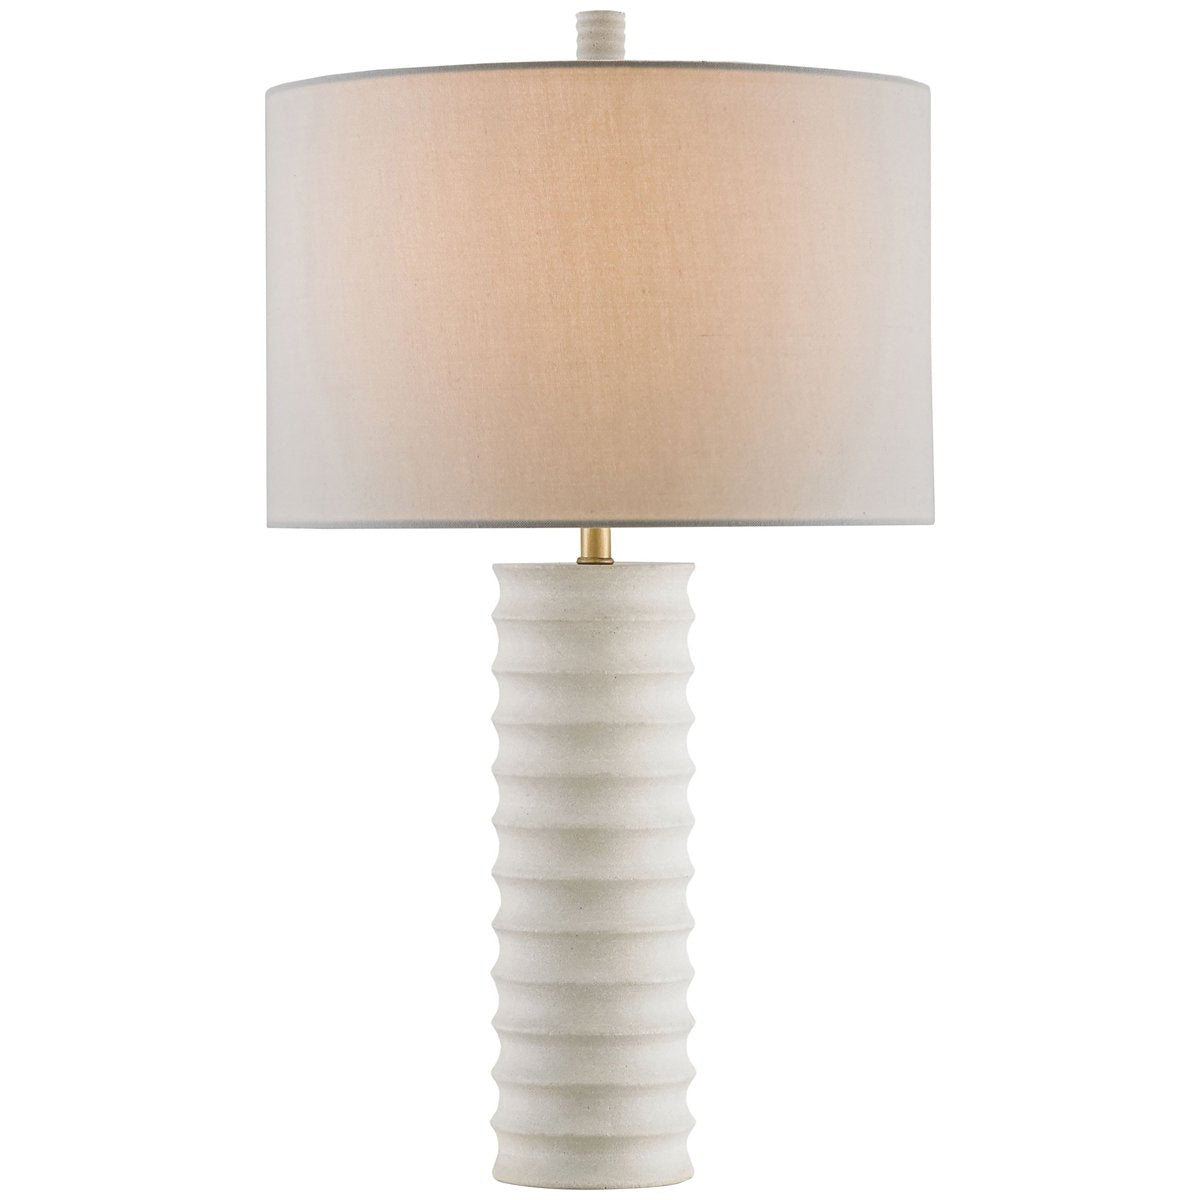 Currey and Company Snowdrop Table Lamp